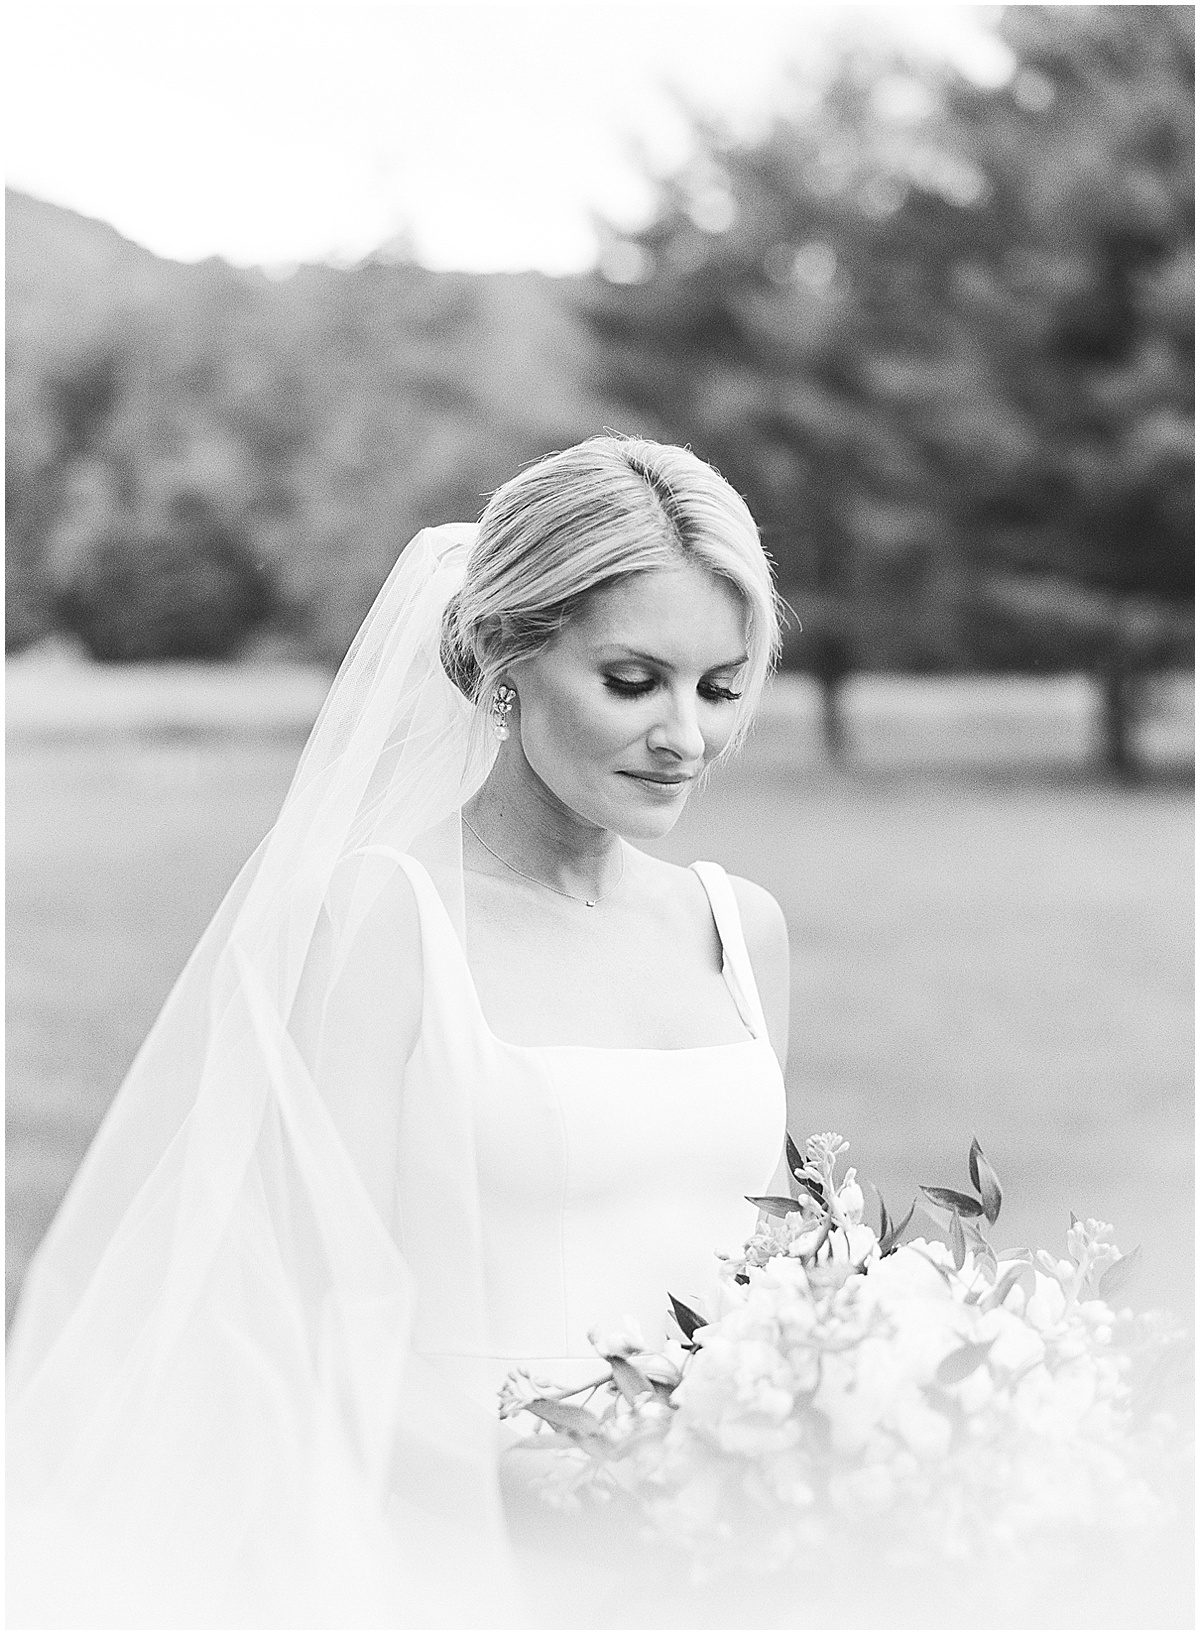 Black and White of Bride Looking at Bouquet Photo